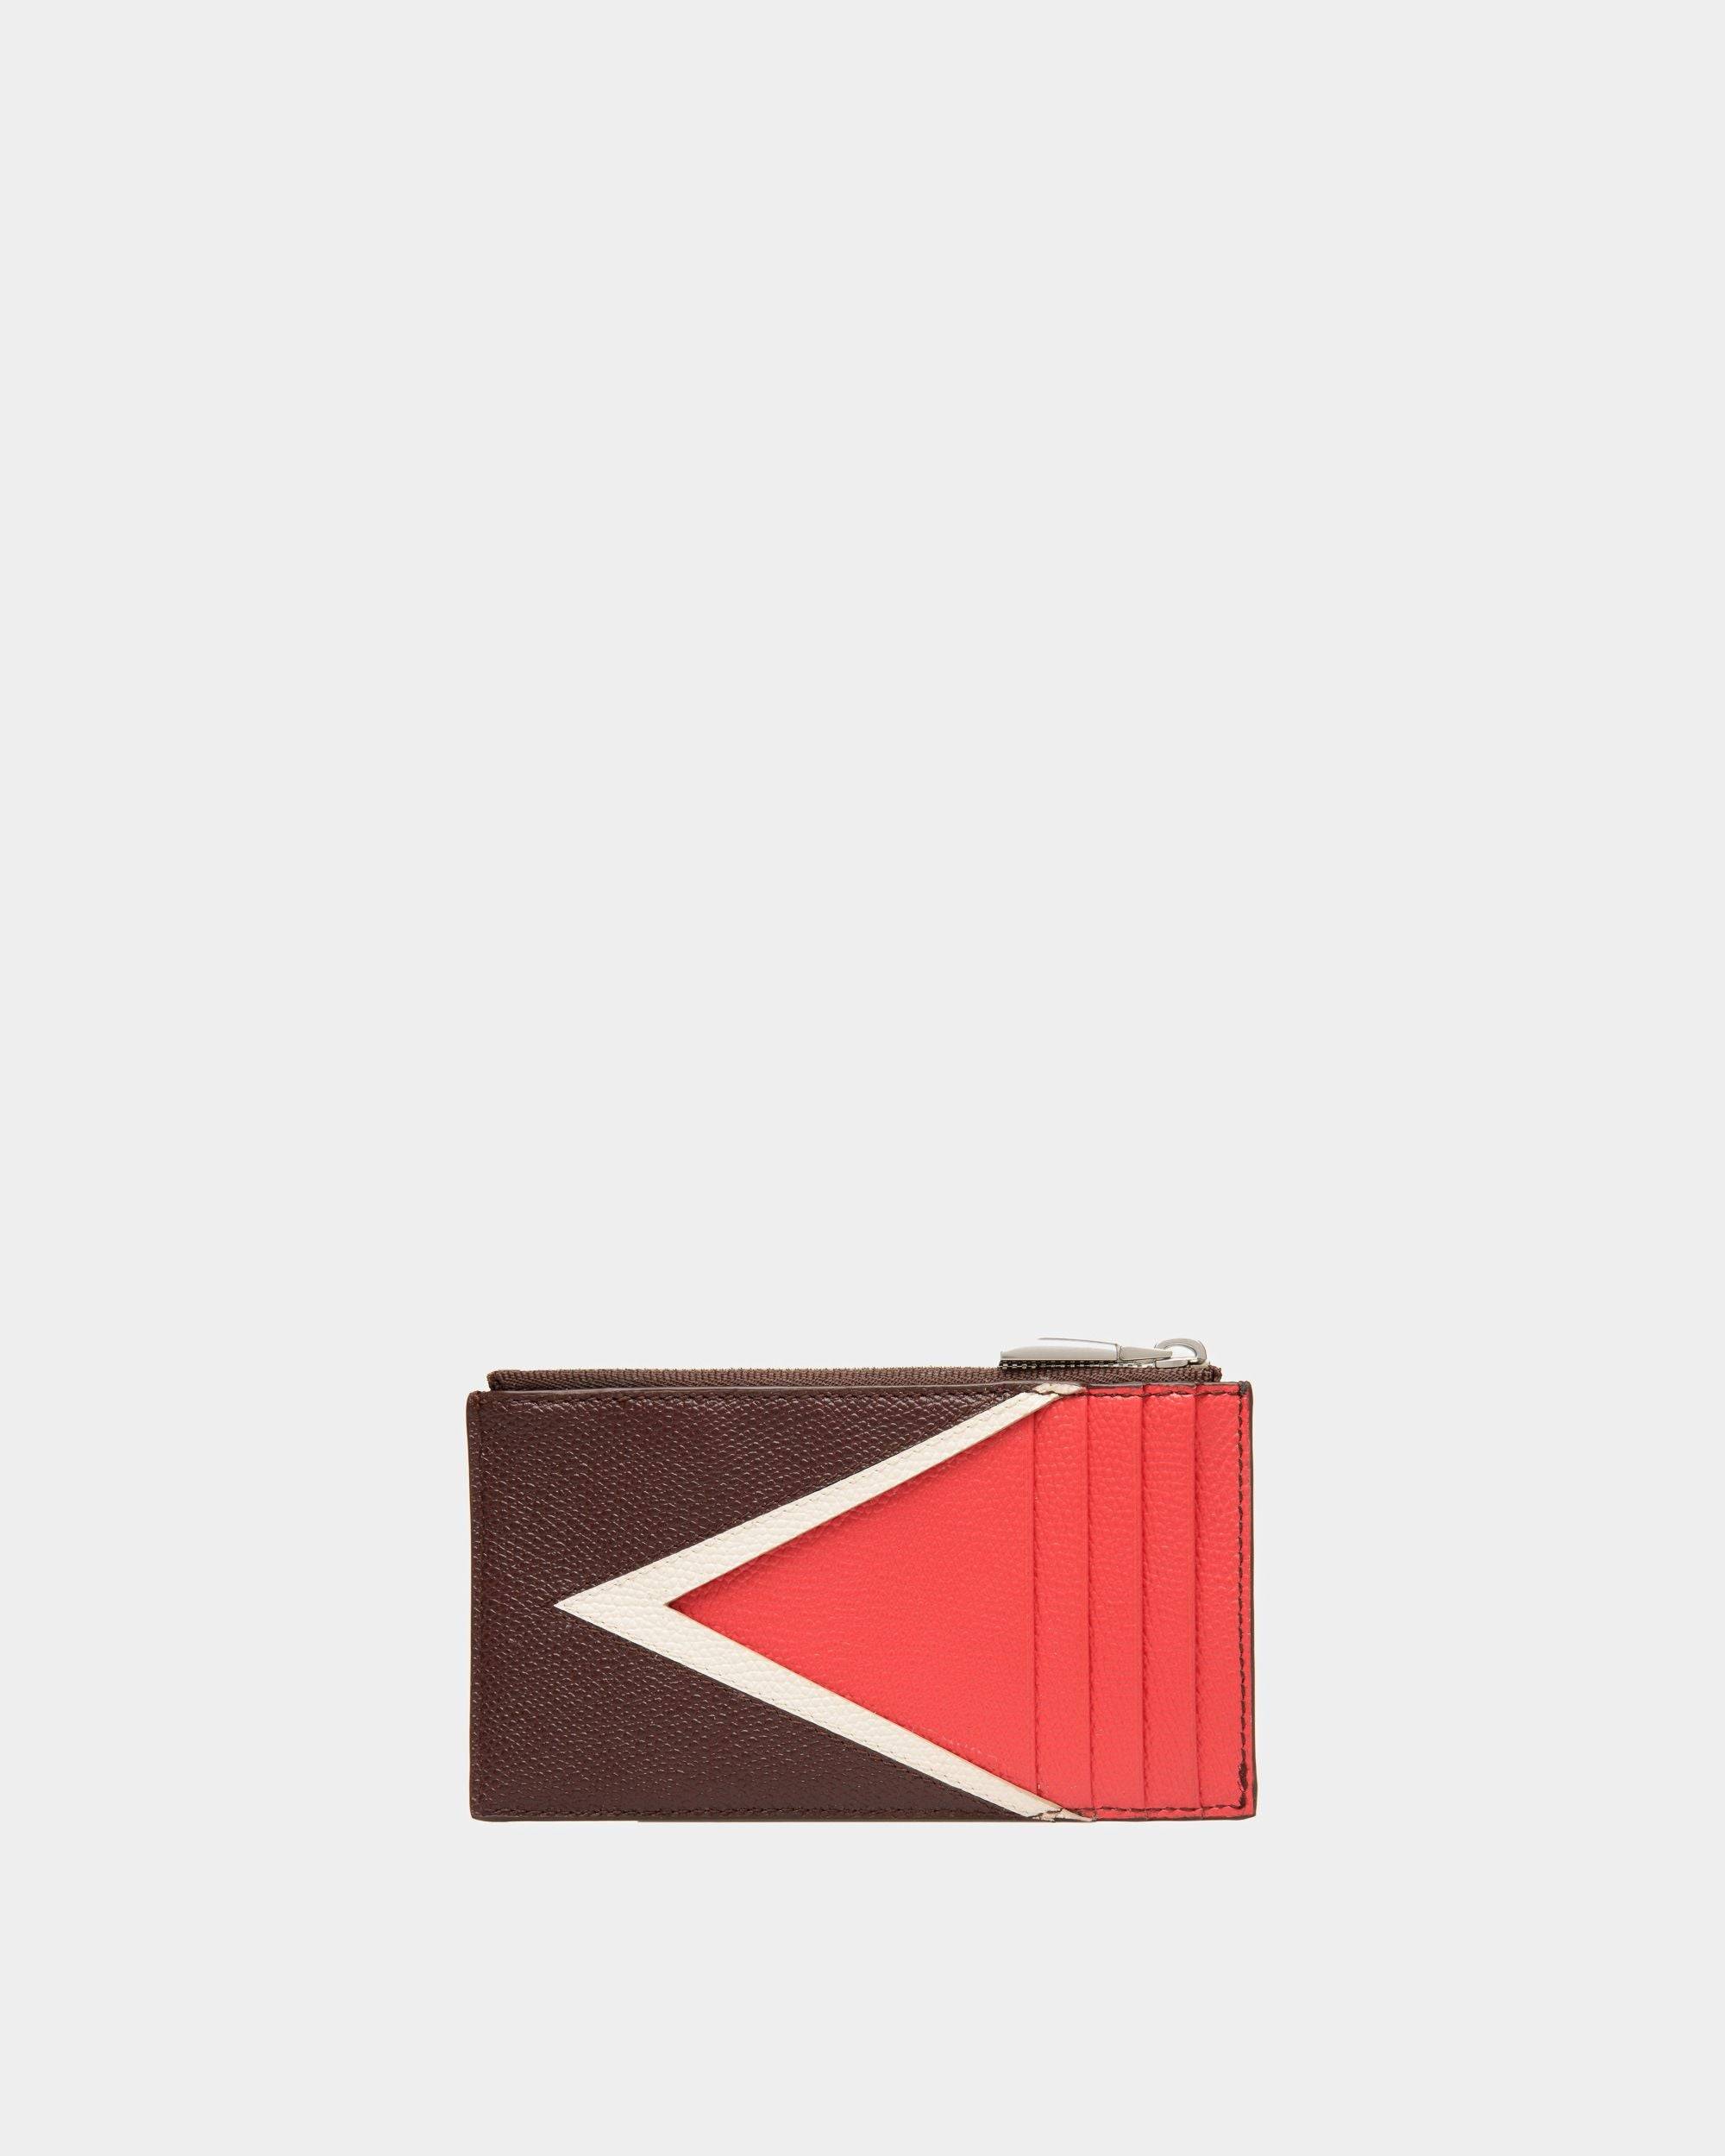 Flag | Men's Coin and Card Holder in Chestnut Brown and Red Embossed Leather | Bally | Still Life Back